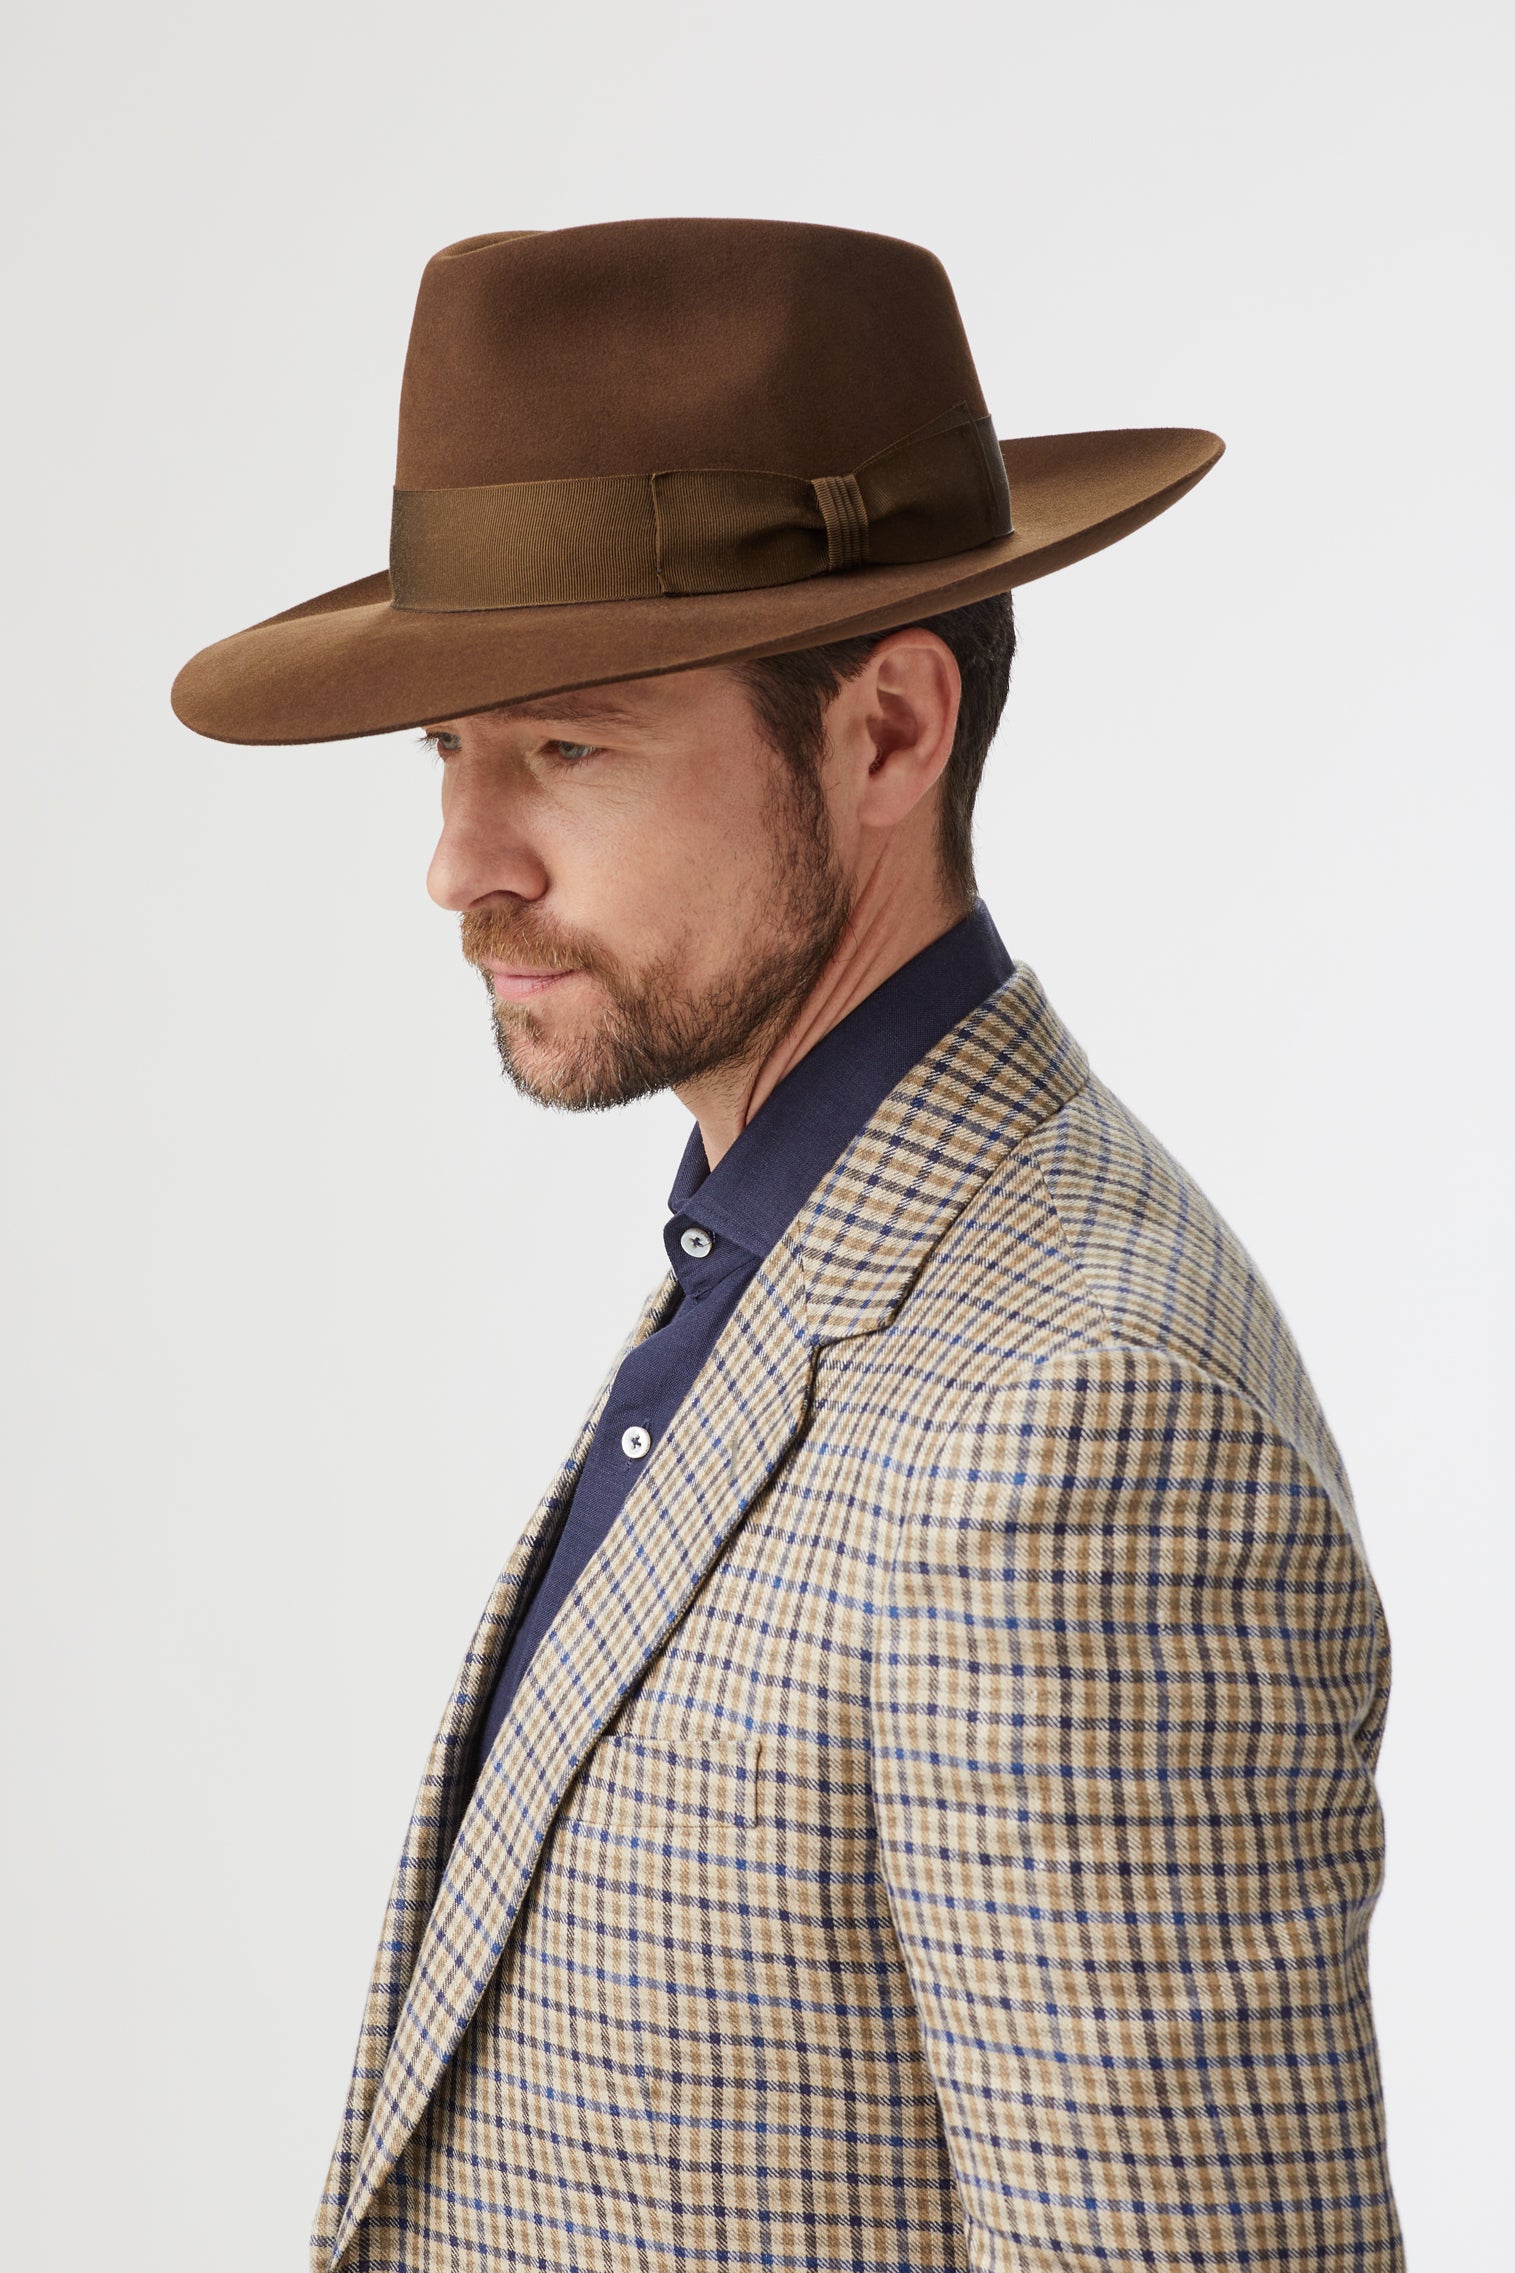 Escorial Wool Stafford Fedora - Hats for Round Face Shapes - Lock & Co. Hatters London UK